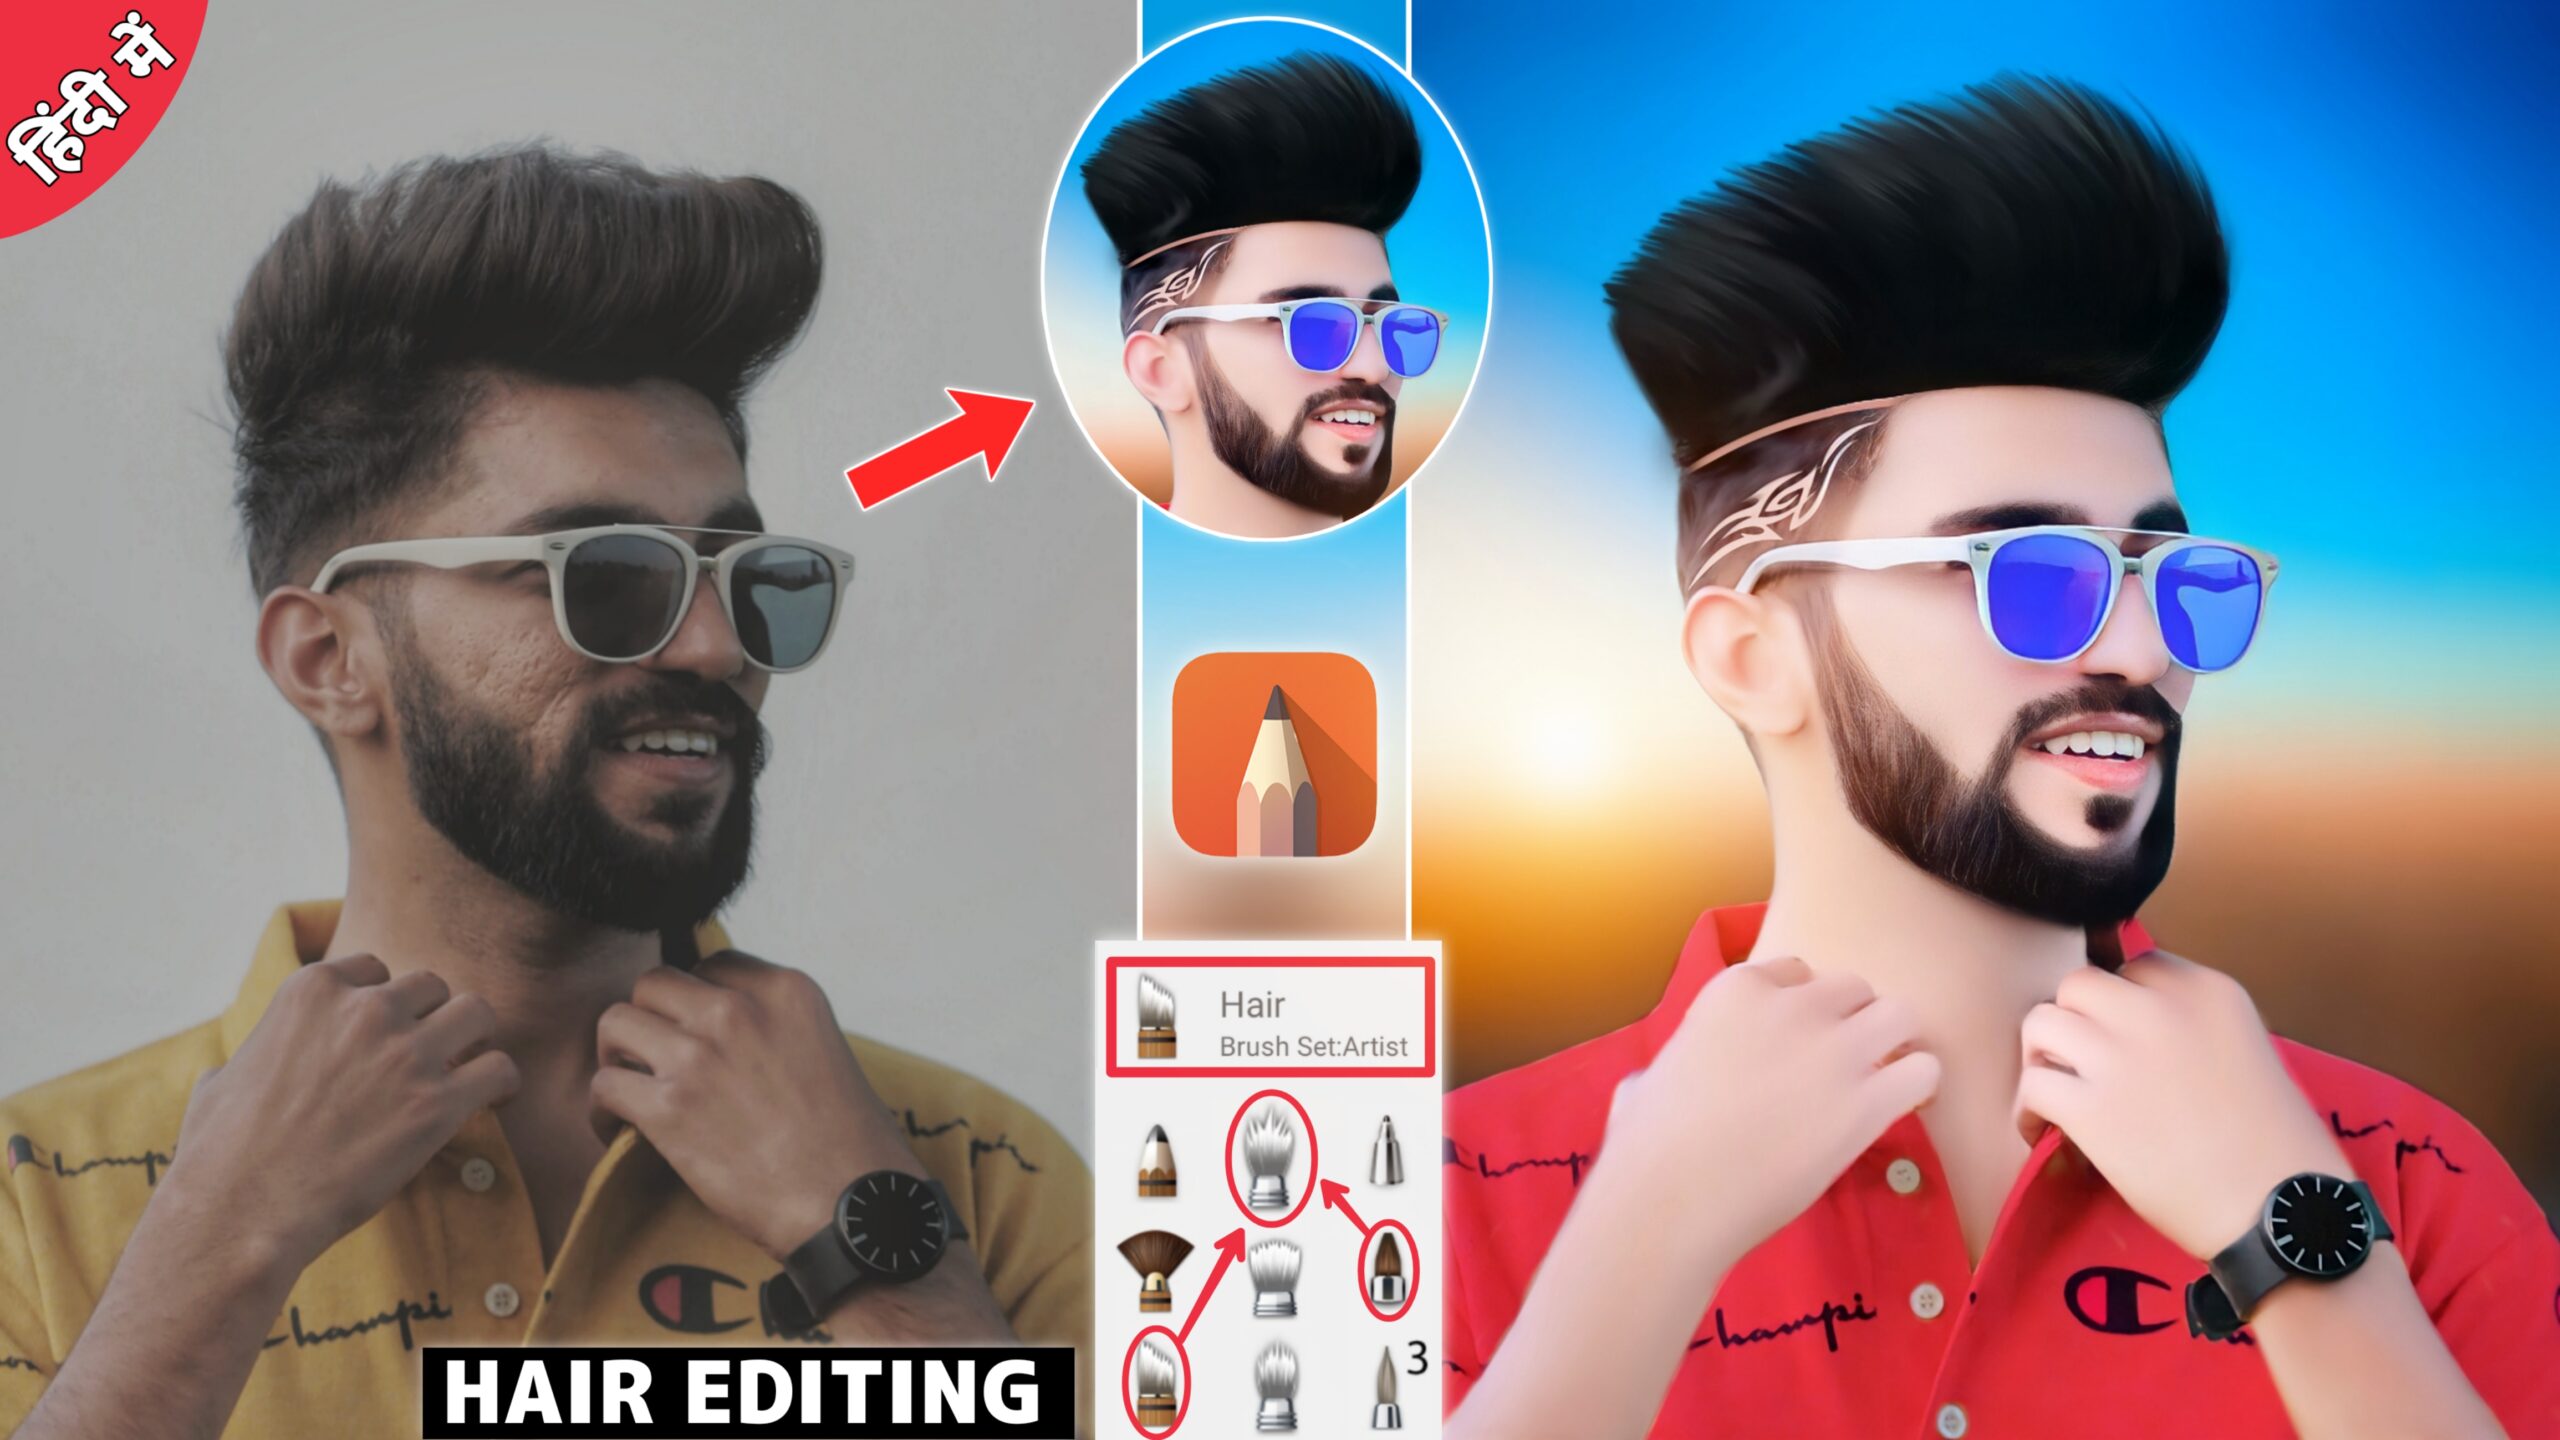 Autodesk Face smooth + Hair Editing Download Background & Png - Razz Suman  Photography